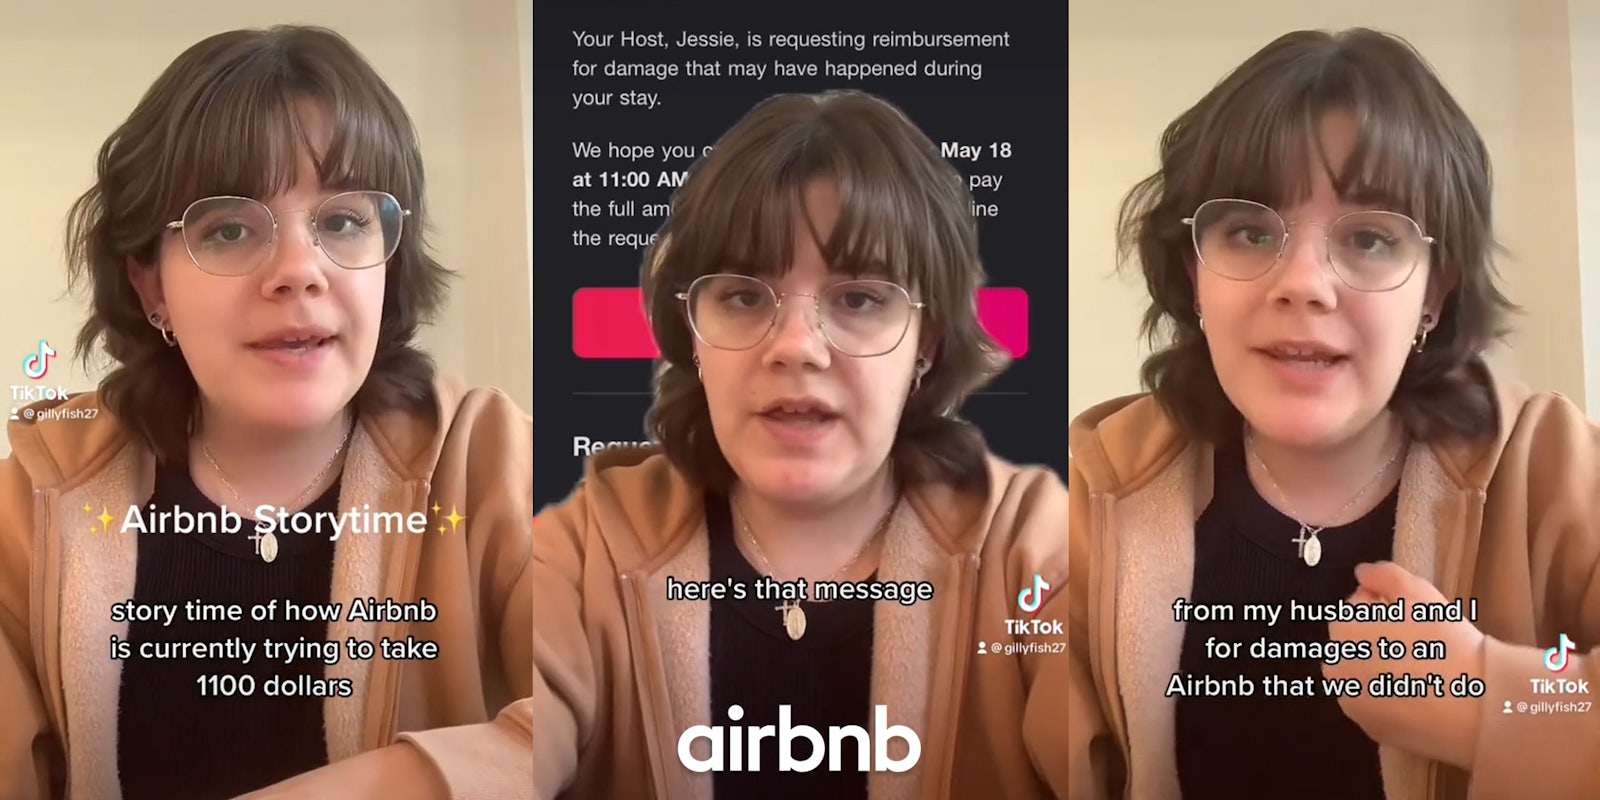 Airbnb customer speaking with caption 'Airbnb Storytime story time of how Airbnb is currently trying to take 1100 dollars' (l) Airbnb customer greenscreen TikTok speaking over Airbnb request with caption 'here's that message' (c) Airbnb customer speaking with caption 'from my husband and I for damages to an Airbnb that we didn't do' (r)